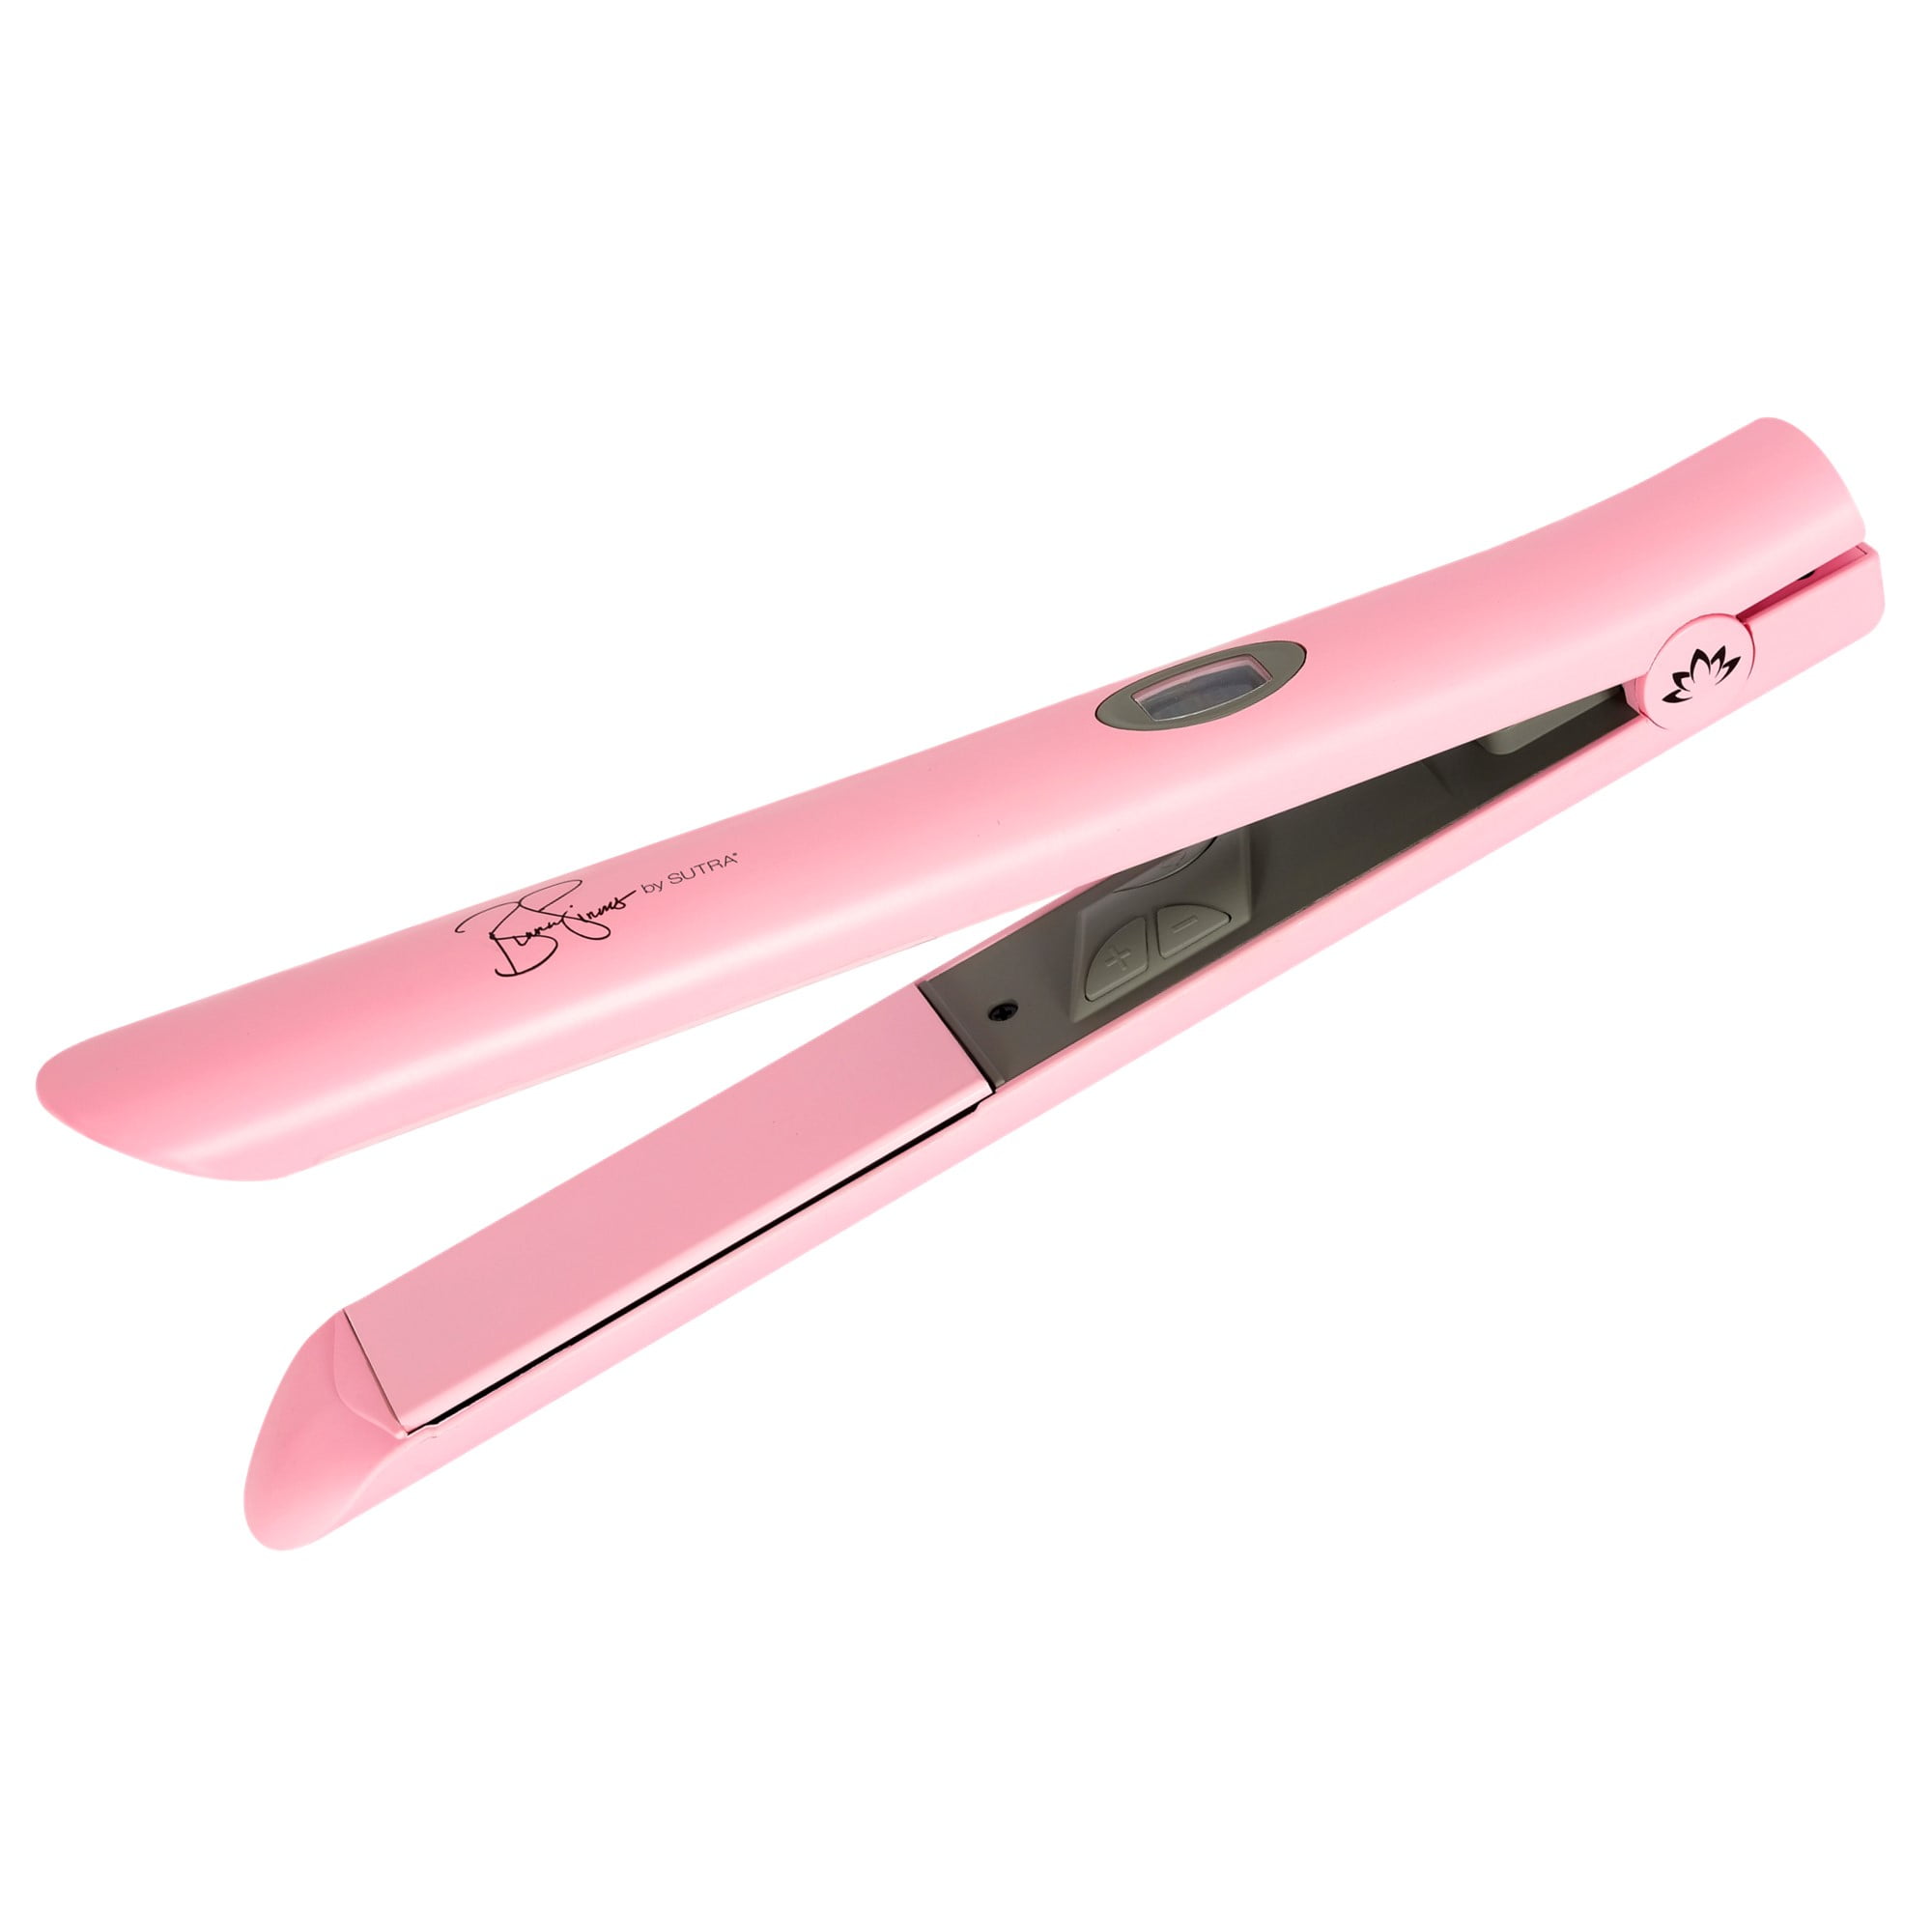 Sutra Magno Turbo Flat Iron (Bianca Collection Pink) $12.25 + Free S&H w/ Walmart+ or $35+